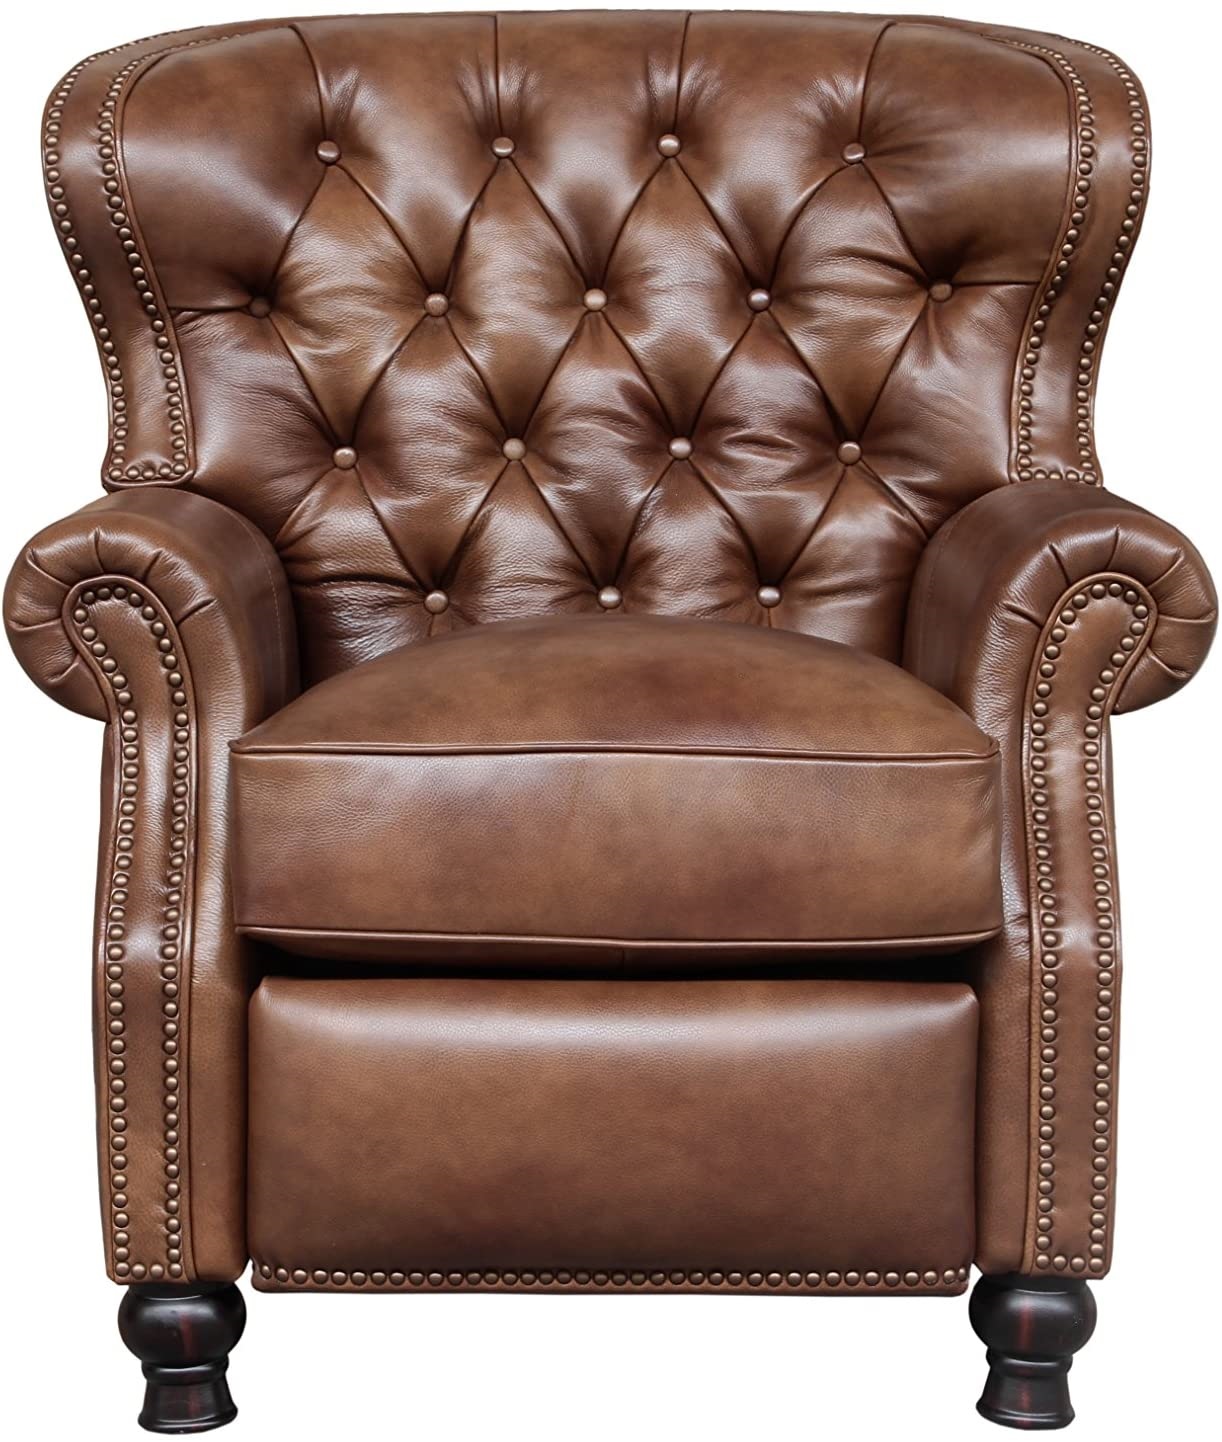 Barcalounger Presidential Recliner - Wenlock-Tawny